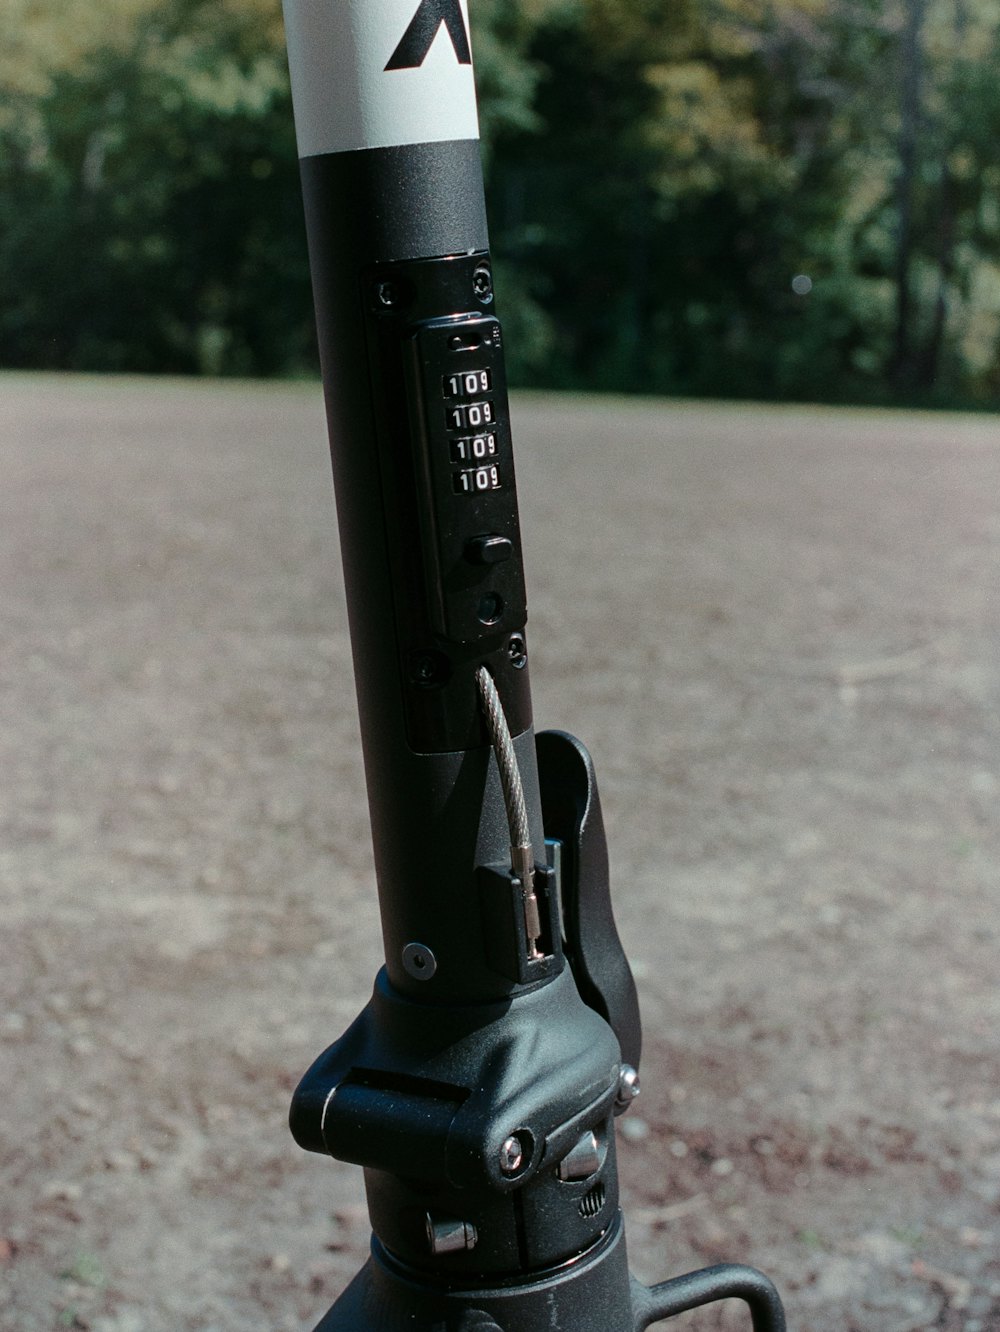 The stem of the Gotrax G Pro 3.